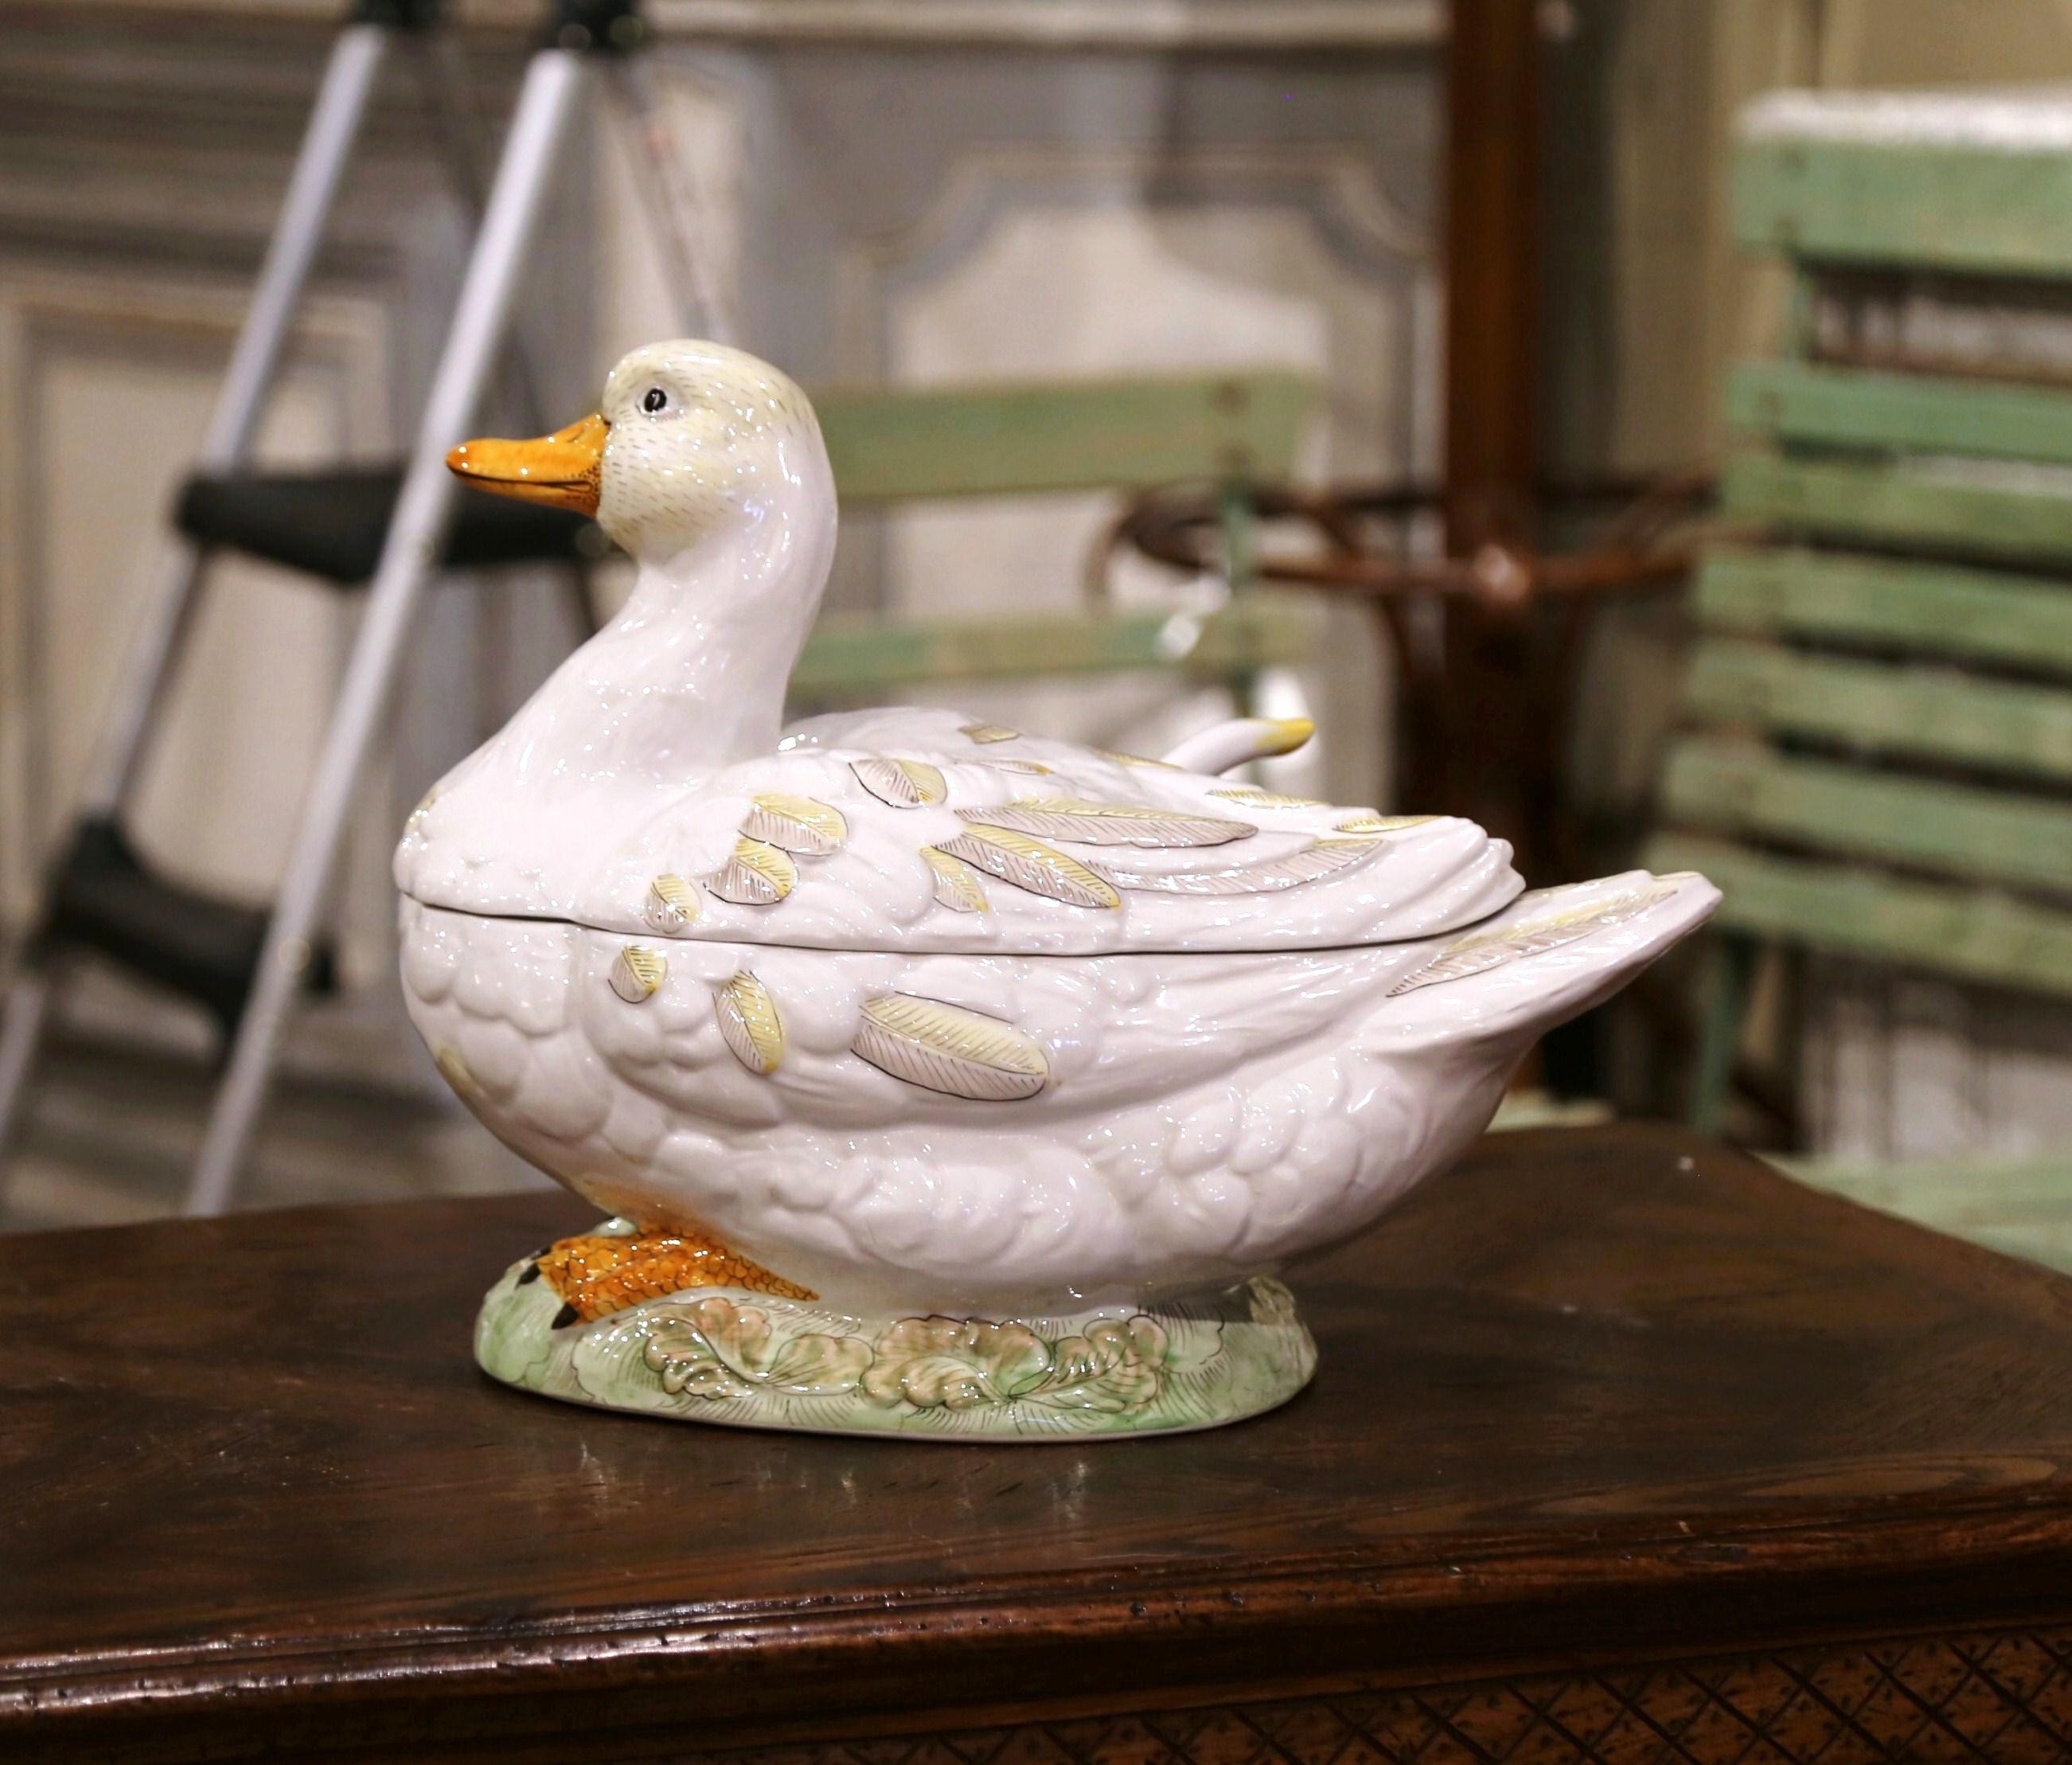 Majolica Vintage French Porcelain Duck Center Piece Soup Tureen with Lid and Ladle